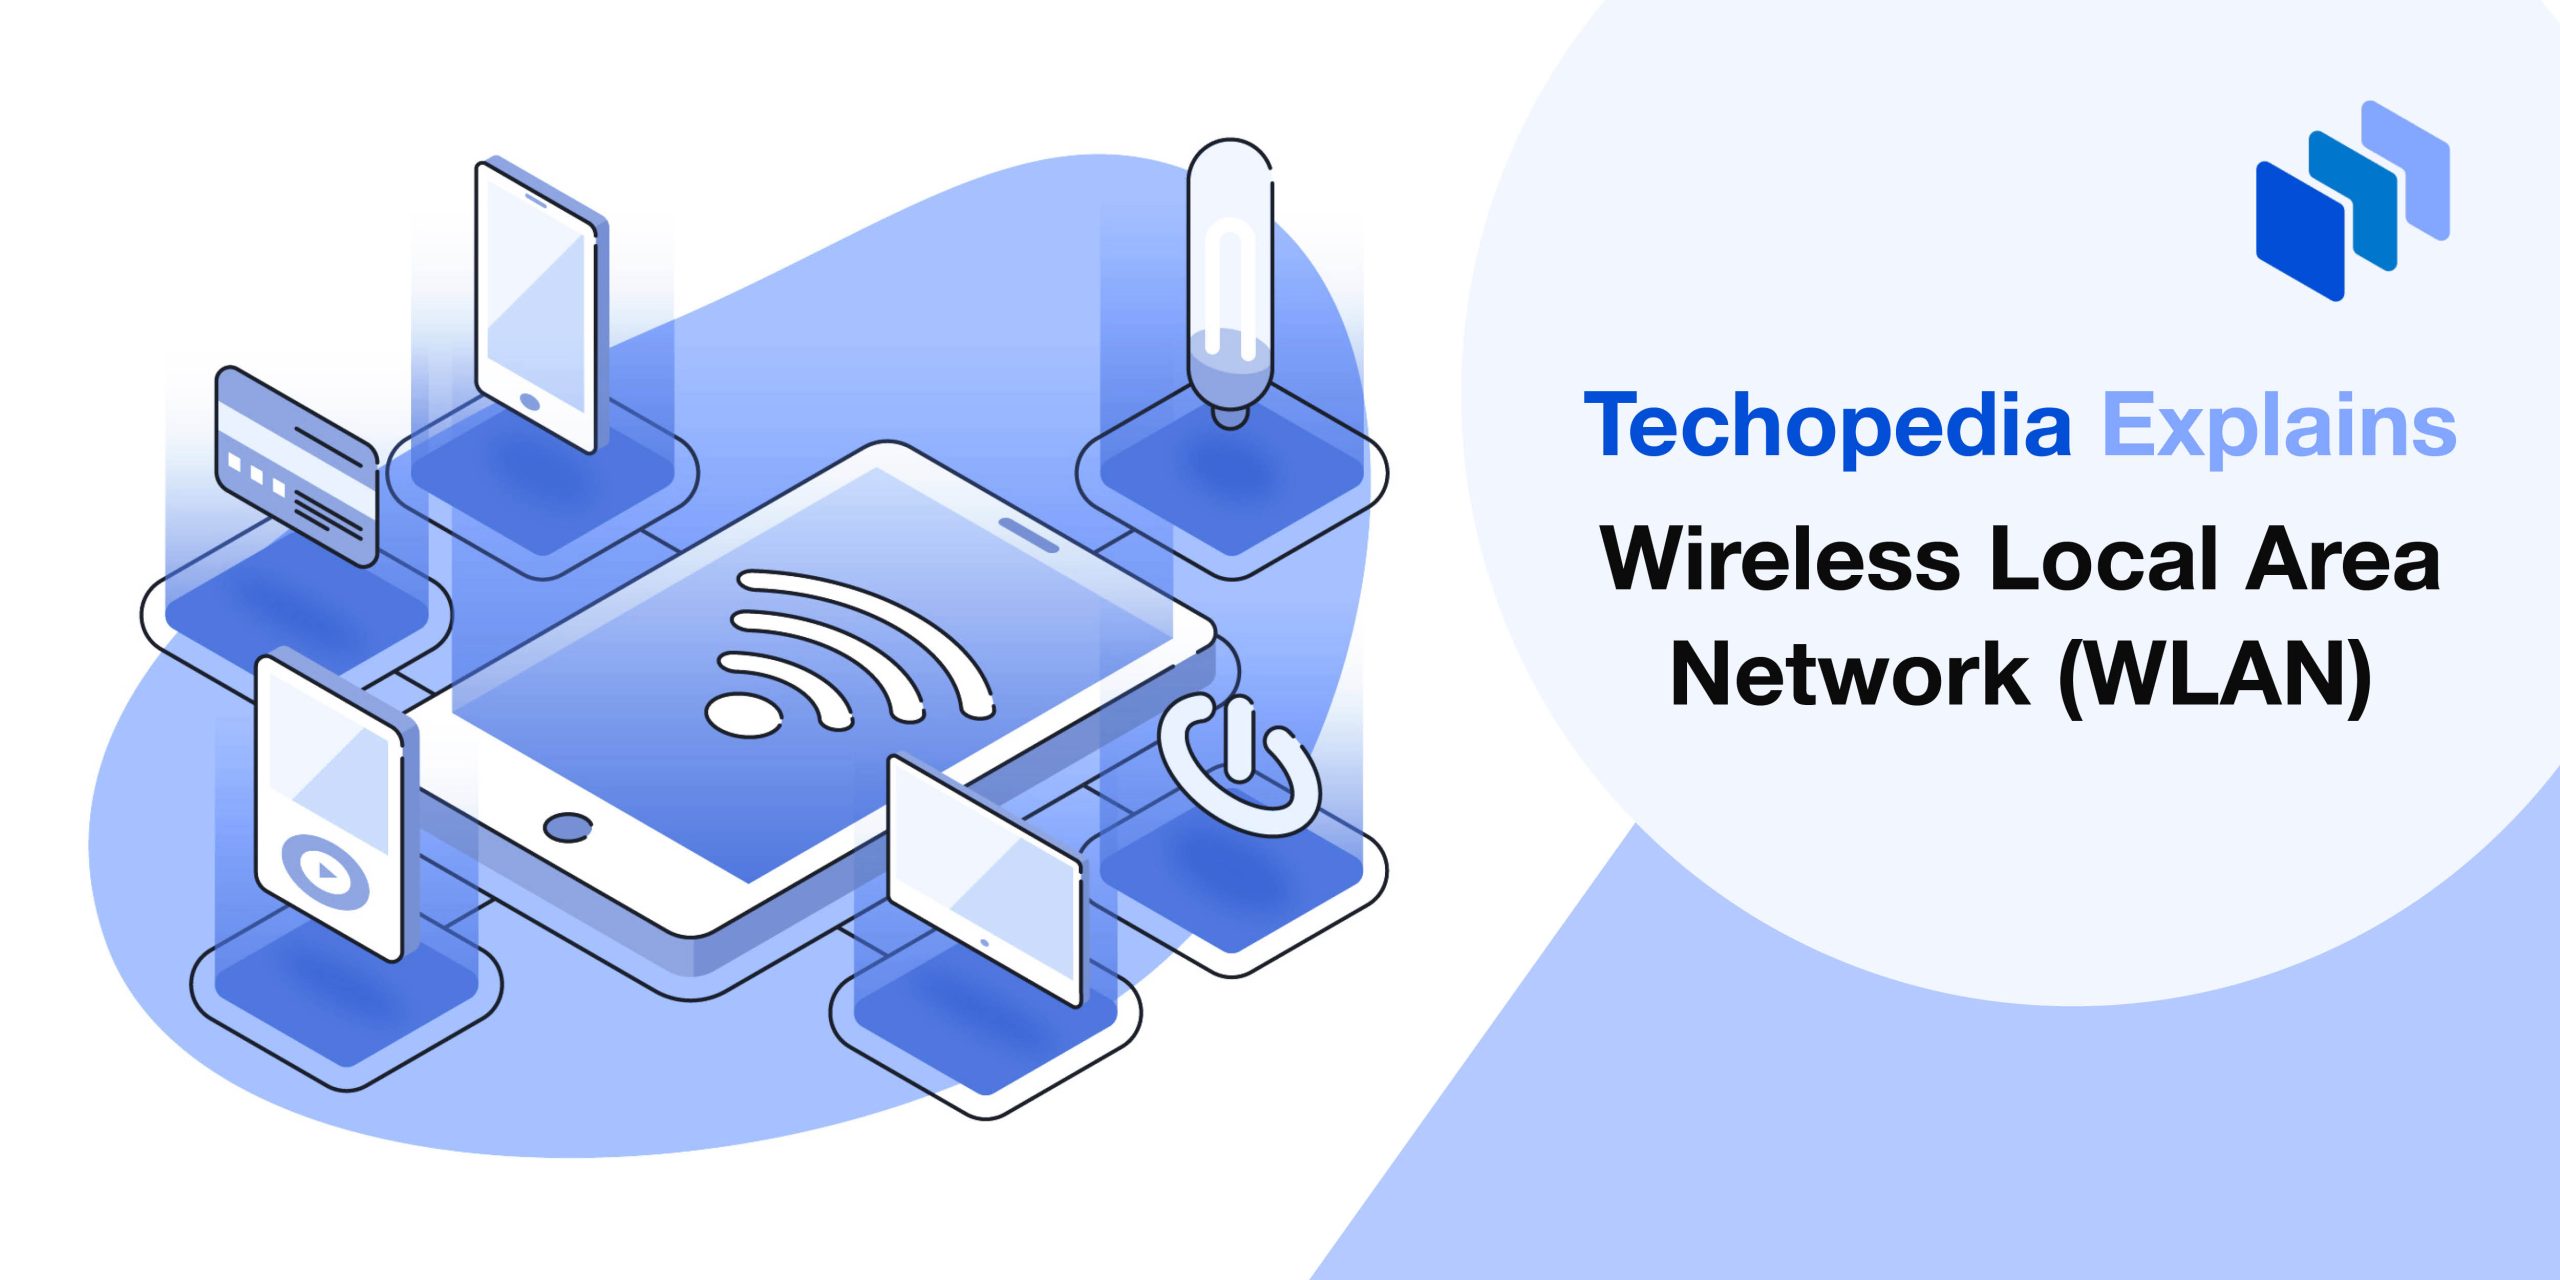 What is Wireless Local Area Network (WLAN)?